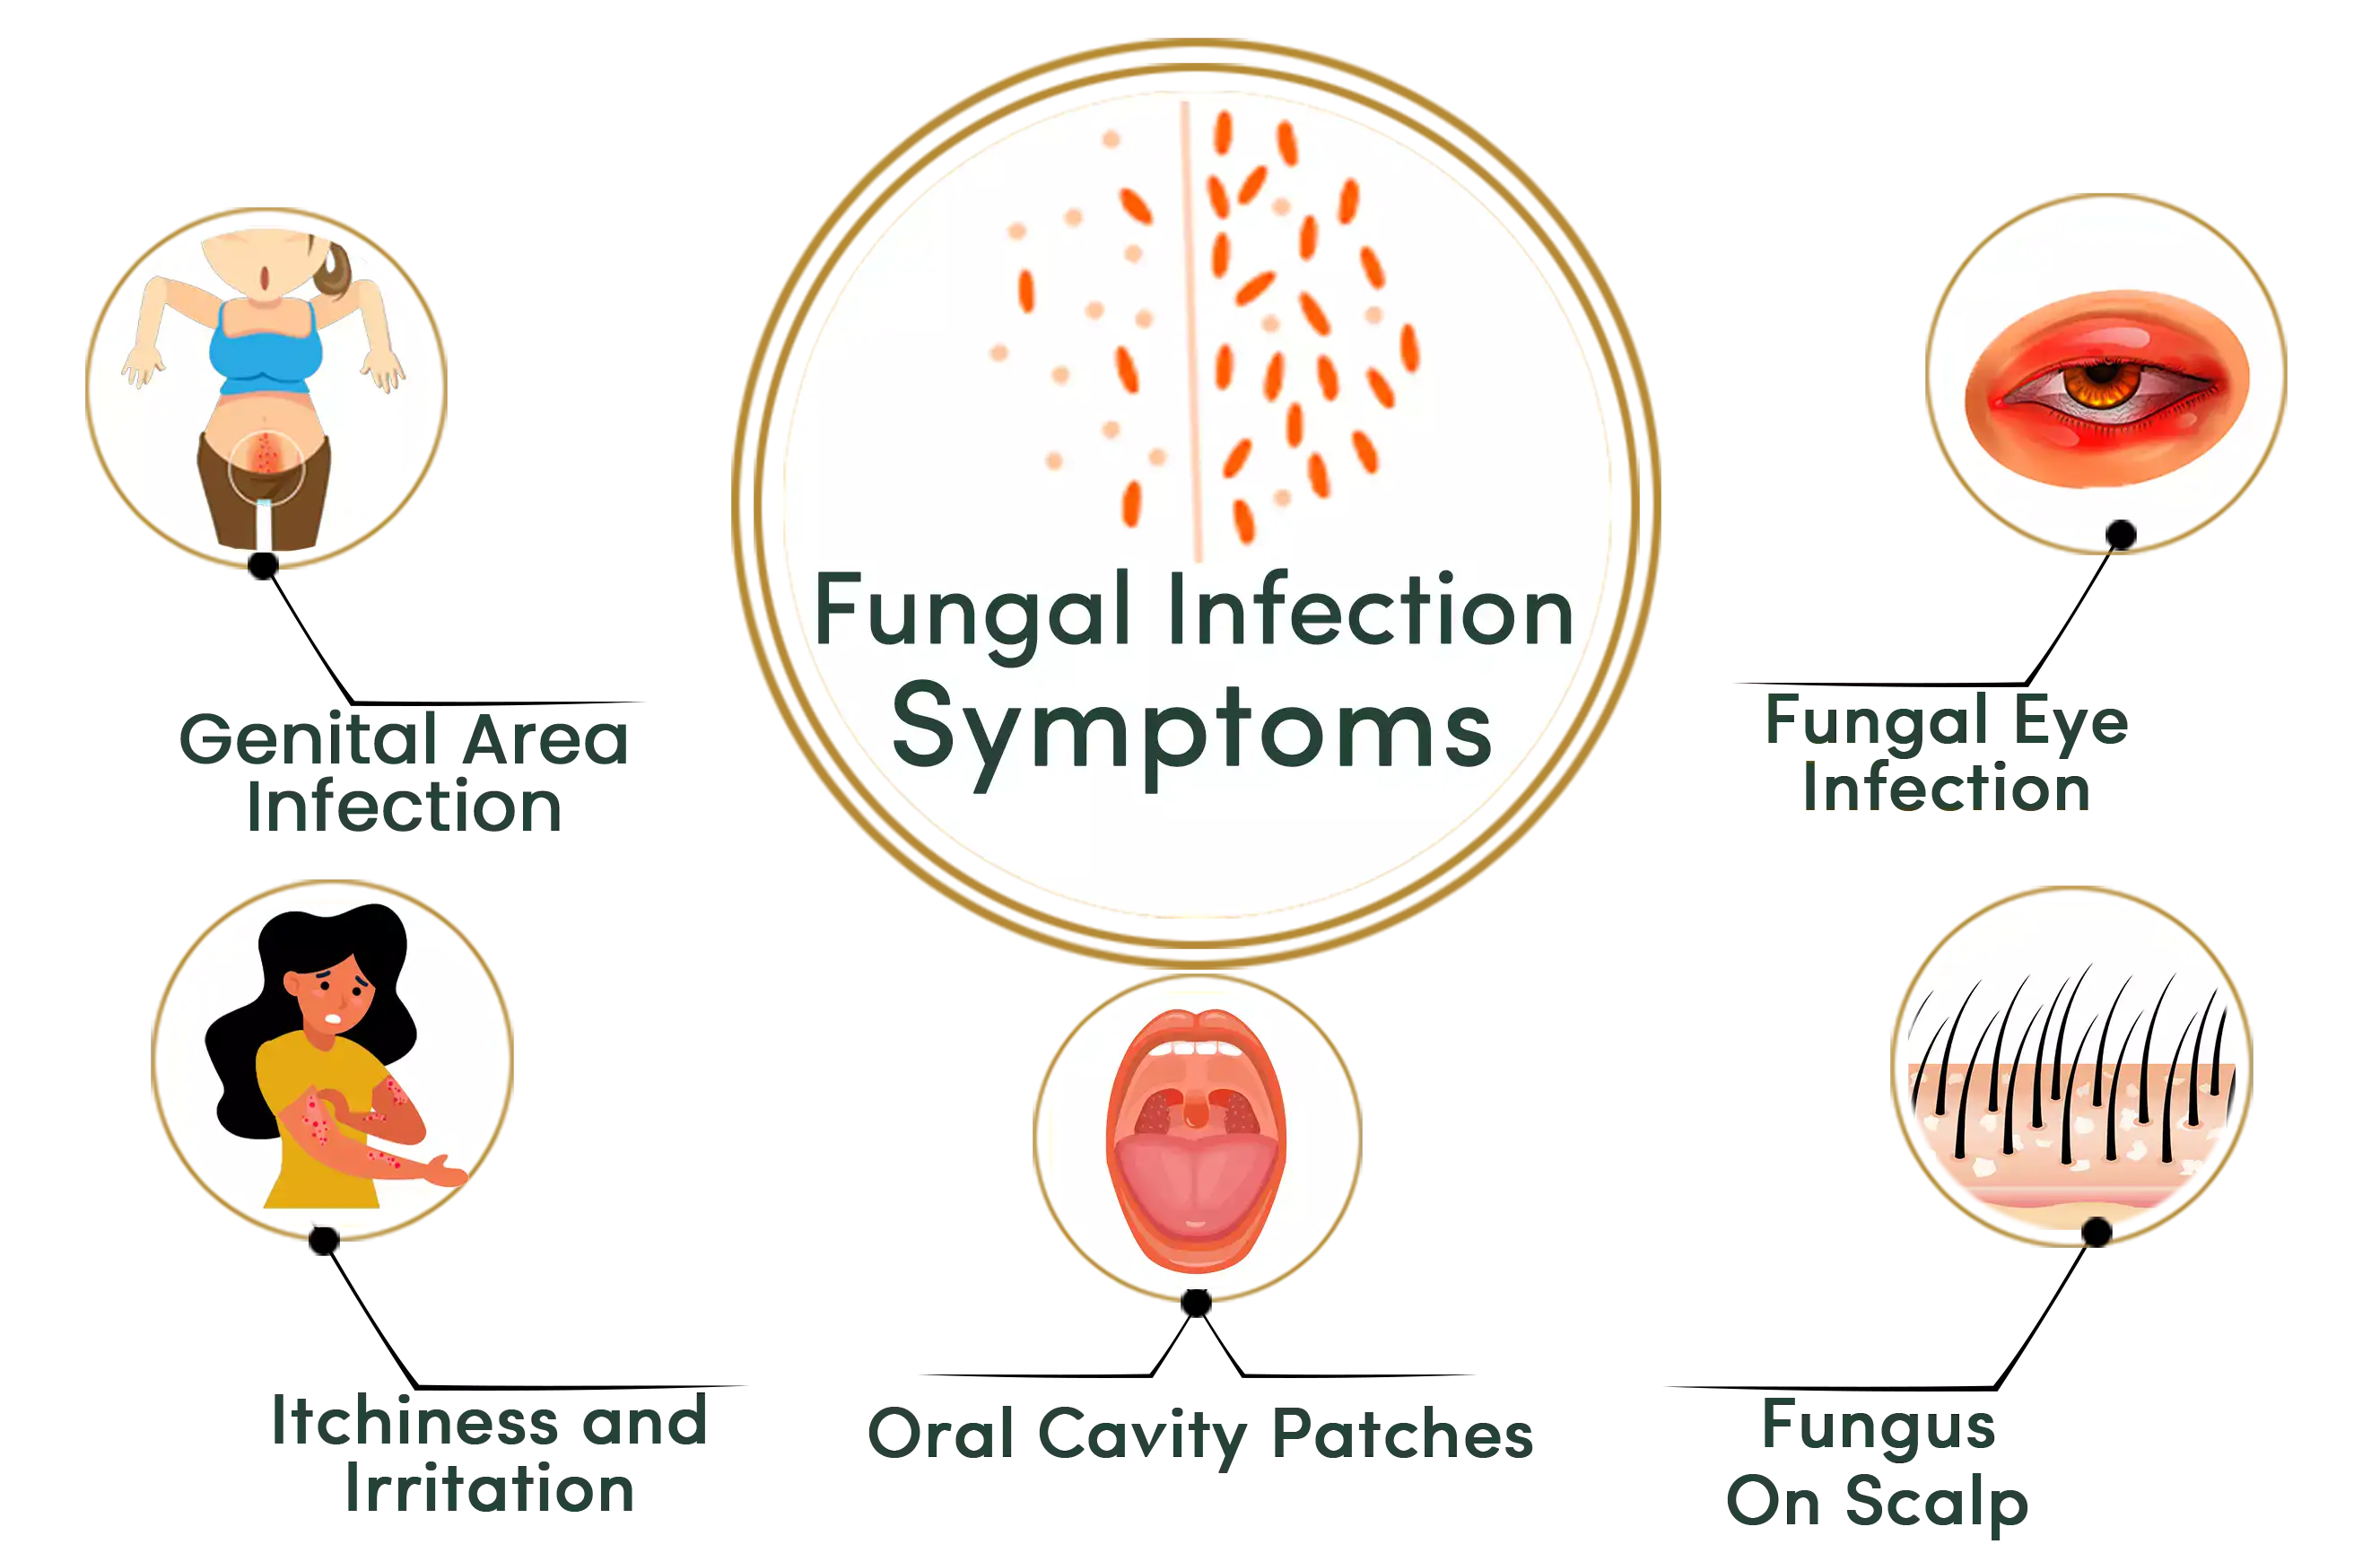 Fungal Infection symptoms